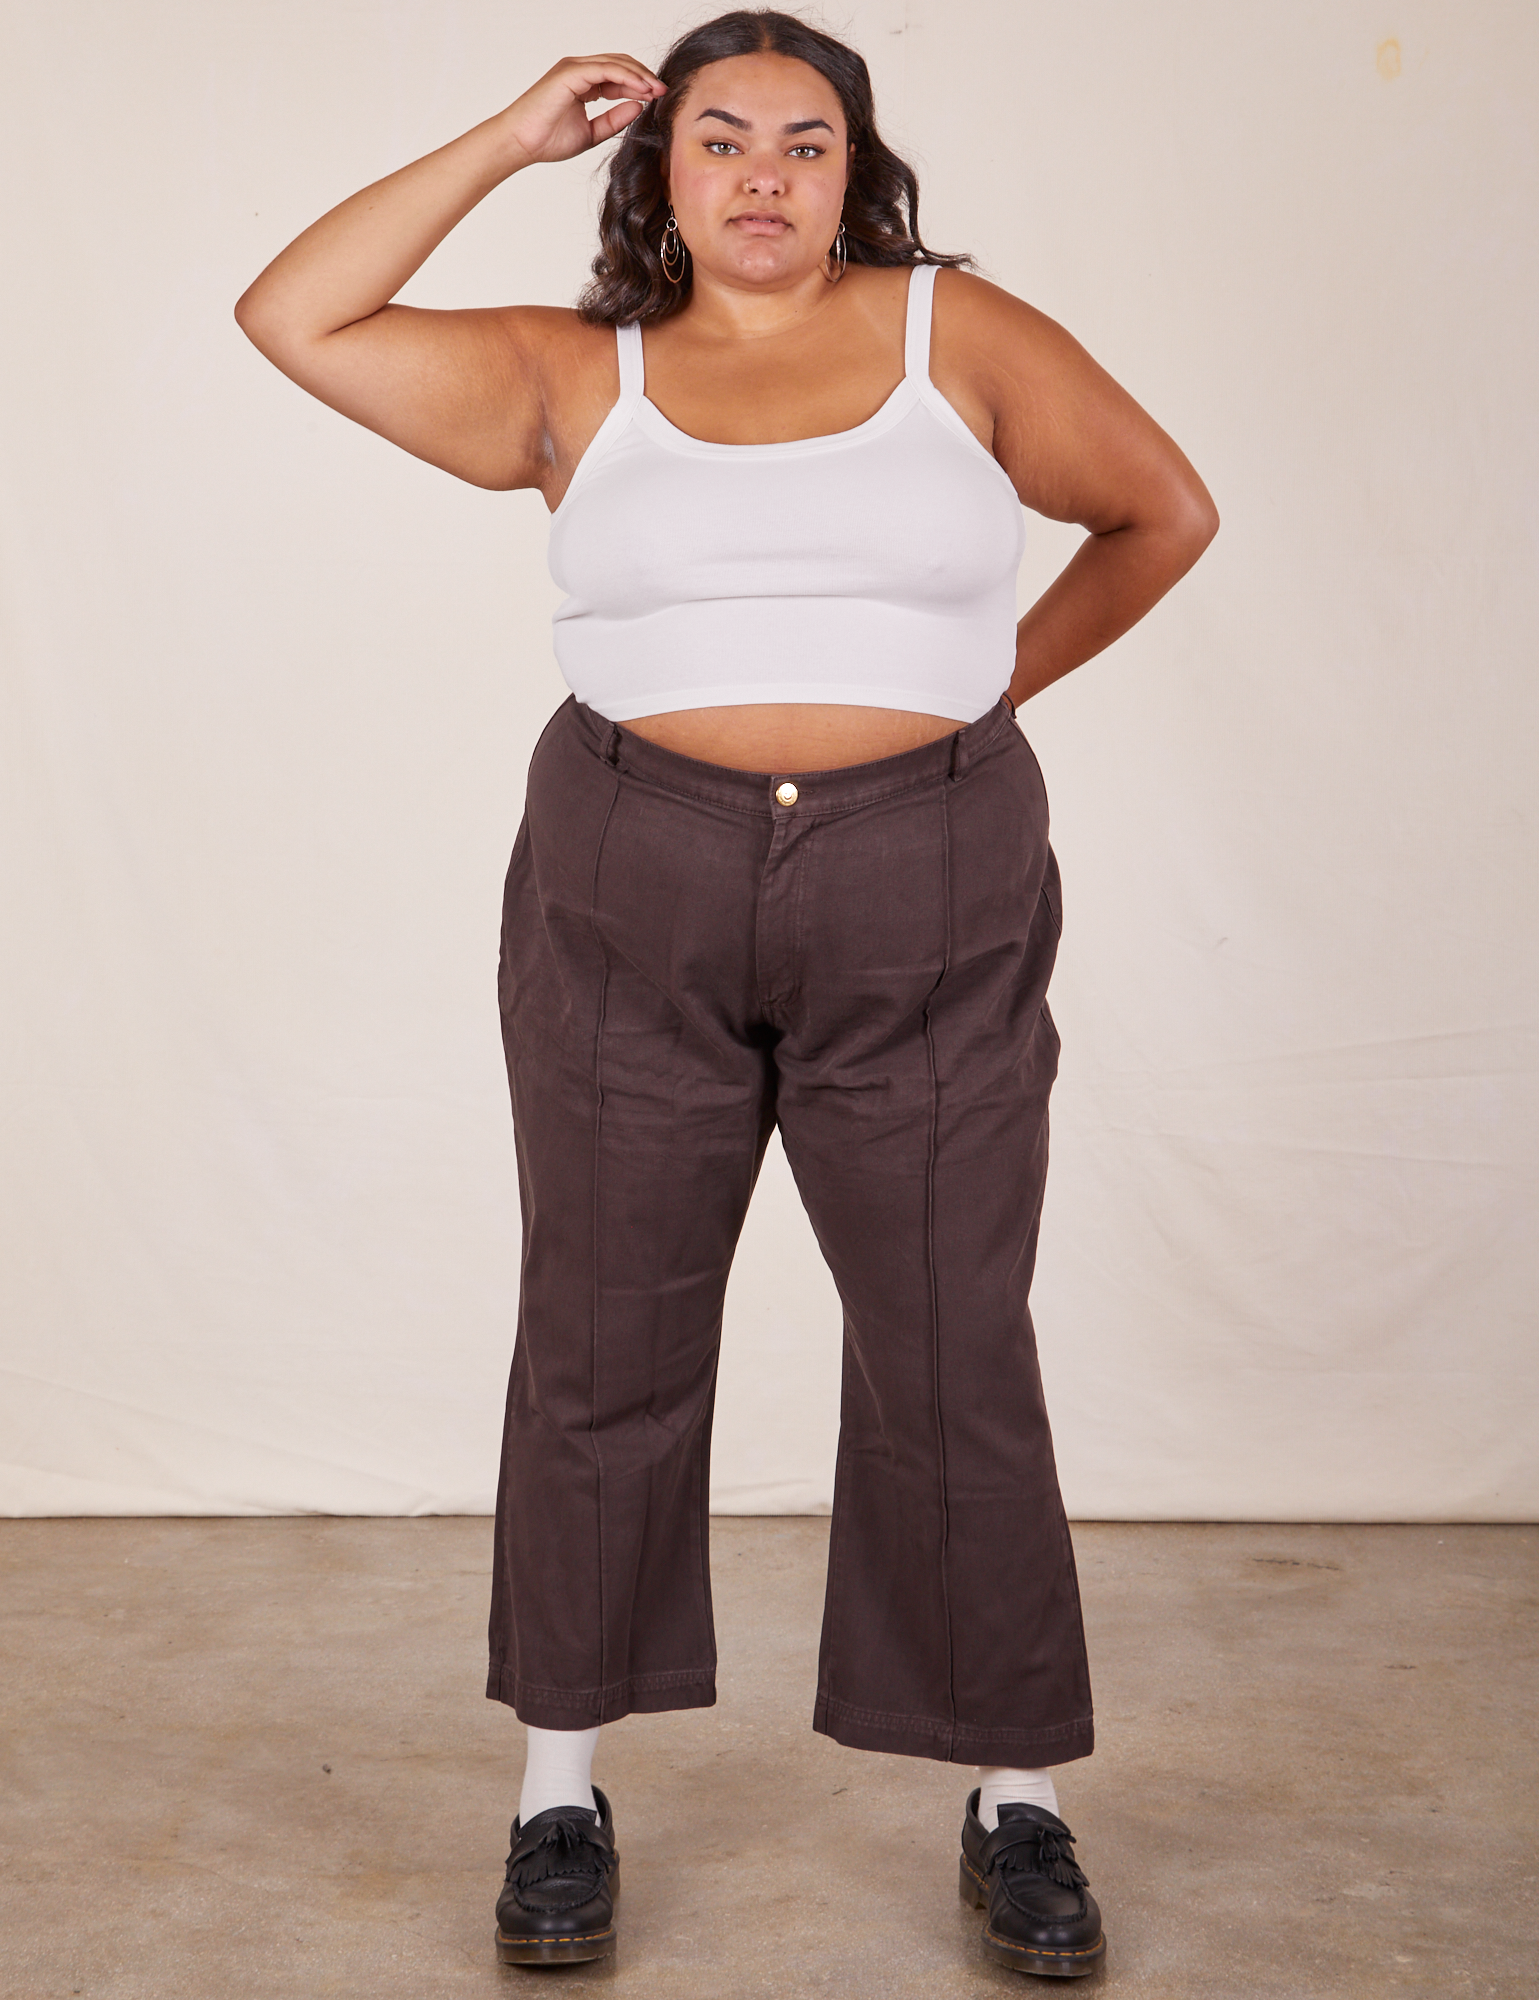 Alicia is wearing Cropped Cami in Vintage Tee Off-White and espresso brown Western Pants